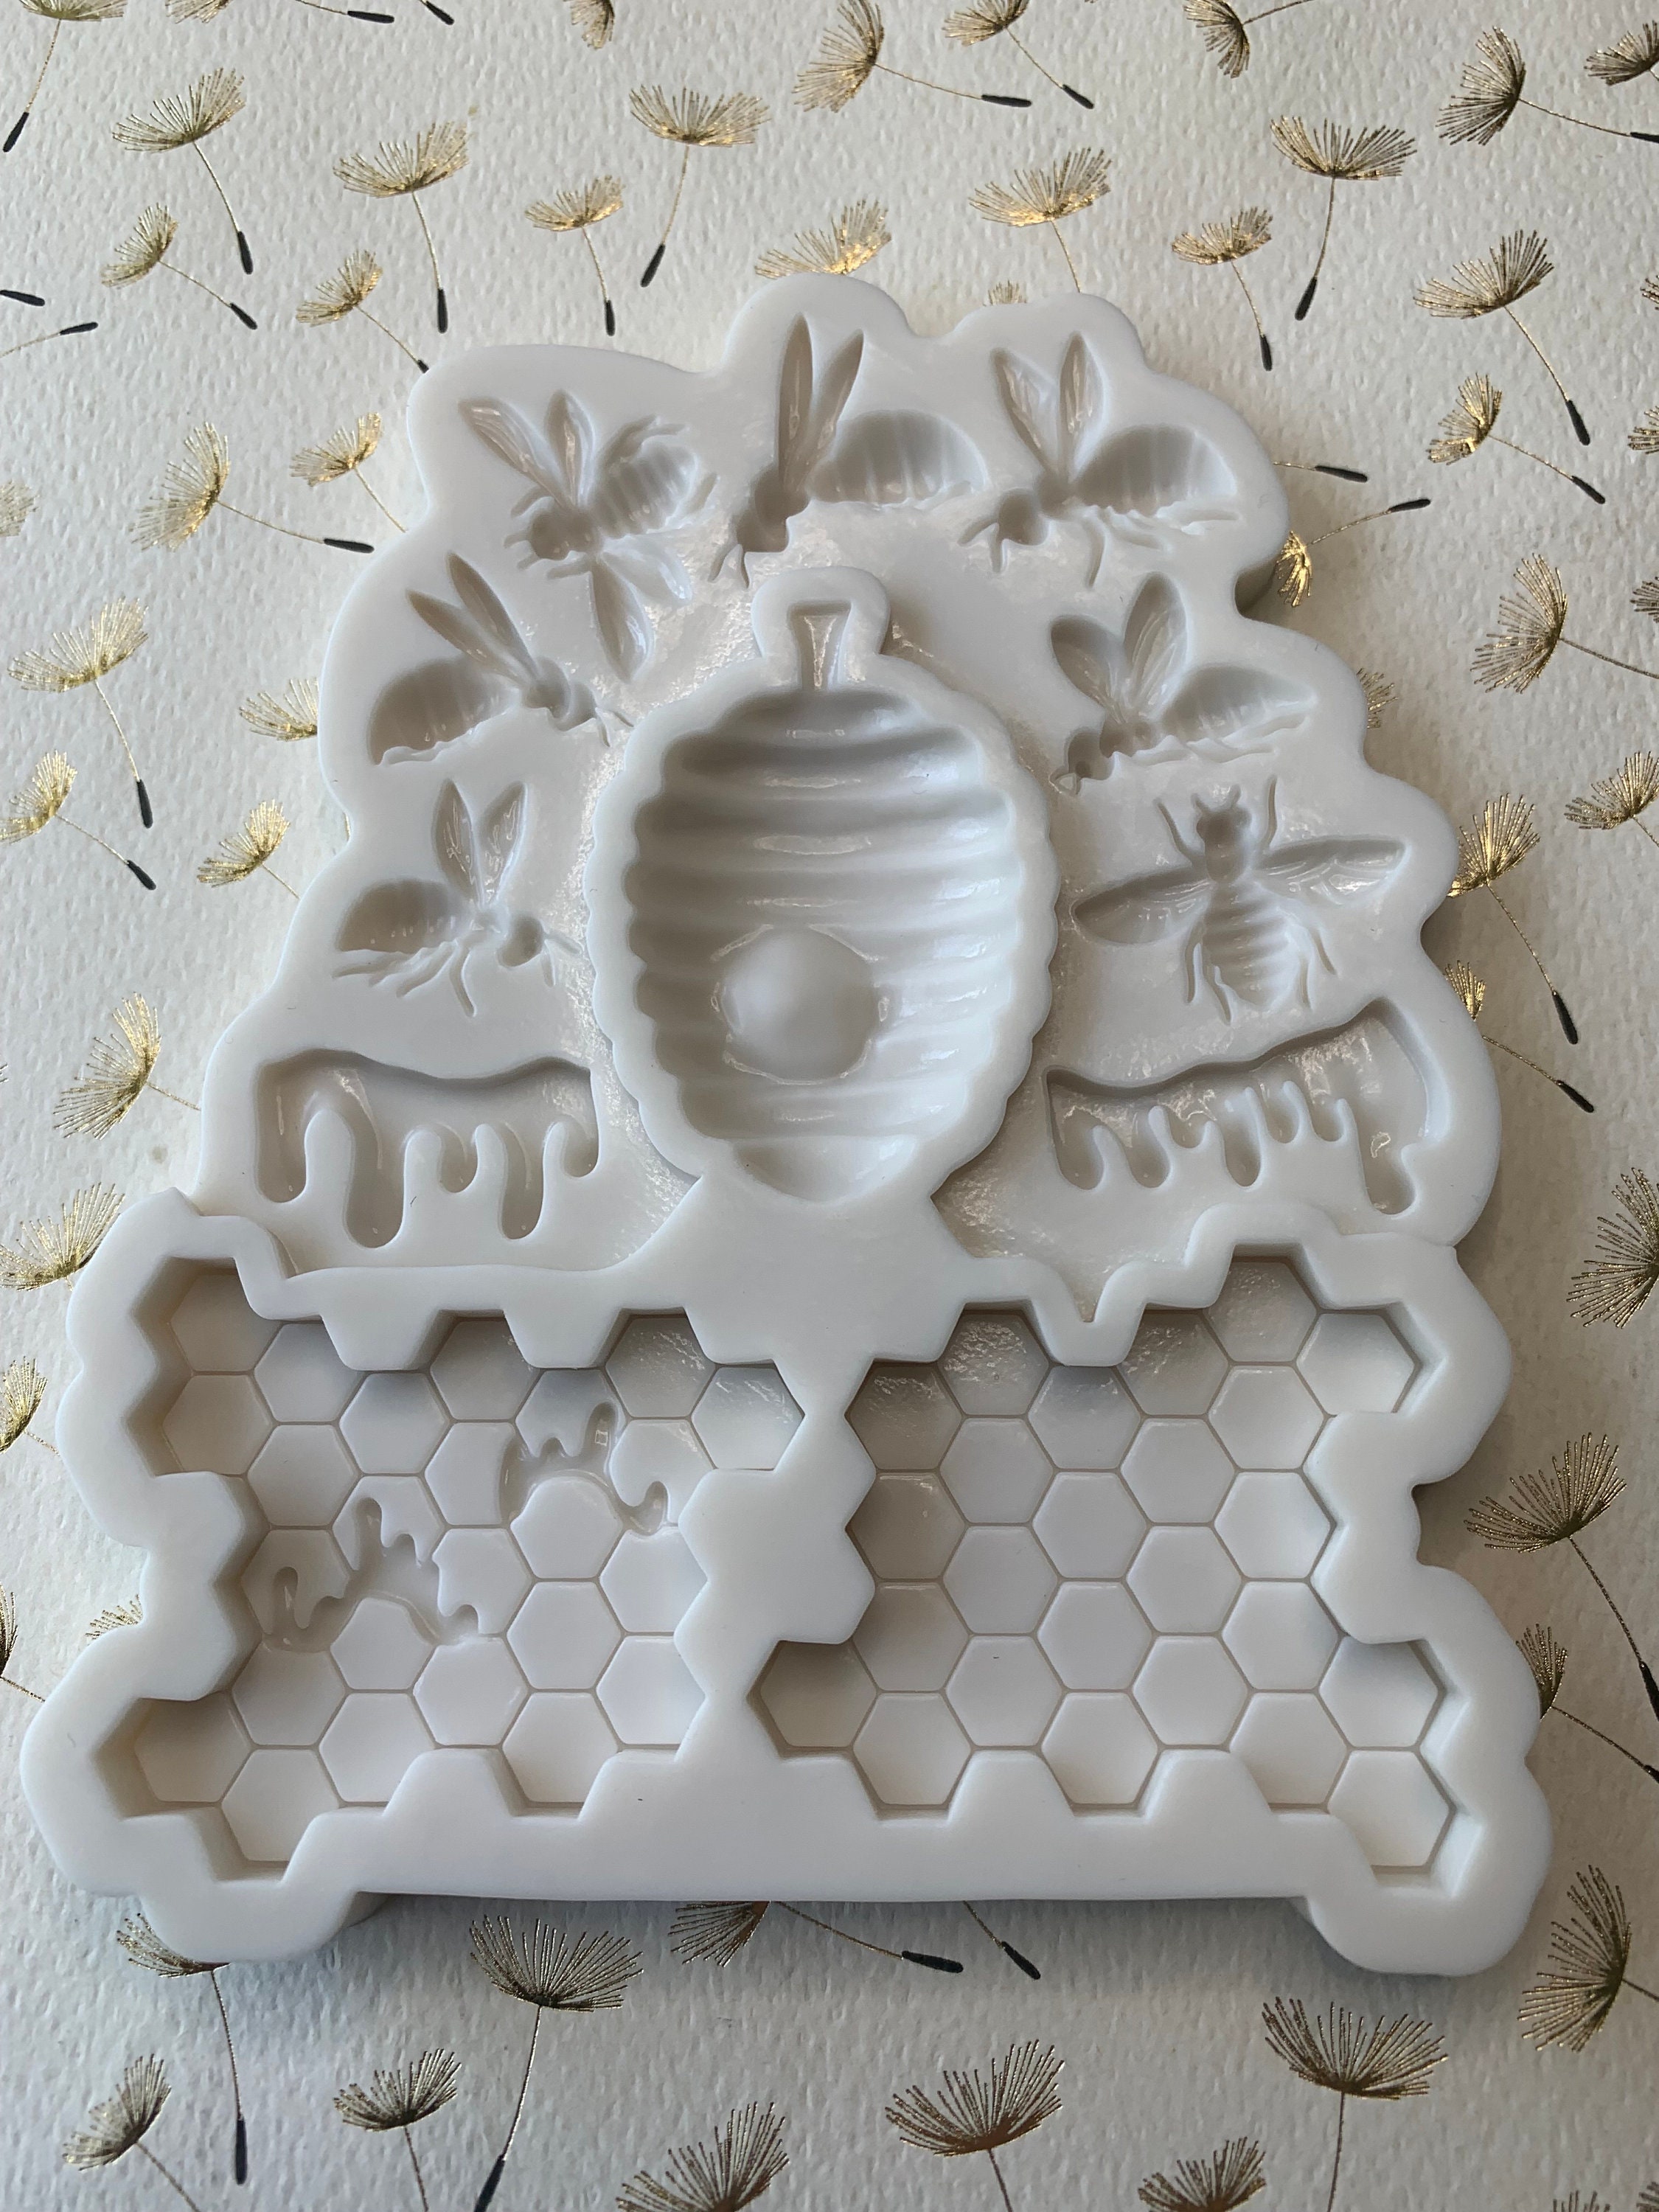 Honeycomb Bumble Bee Silicone Resin Mold Wall Hanging Plaster Clay Resin  Art KeyChain Molds - Silicone Molds Wholesale & Retail - Fondant, Soap,  Candy, DIY Cake Molds